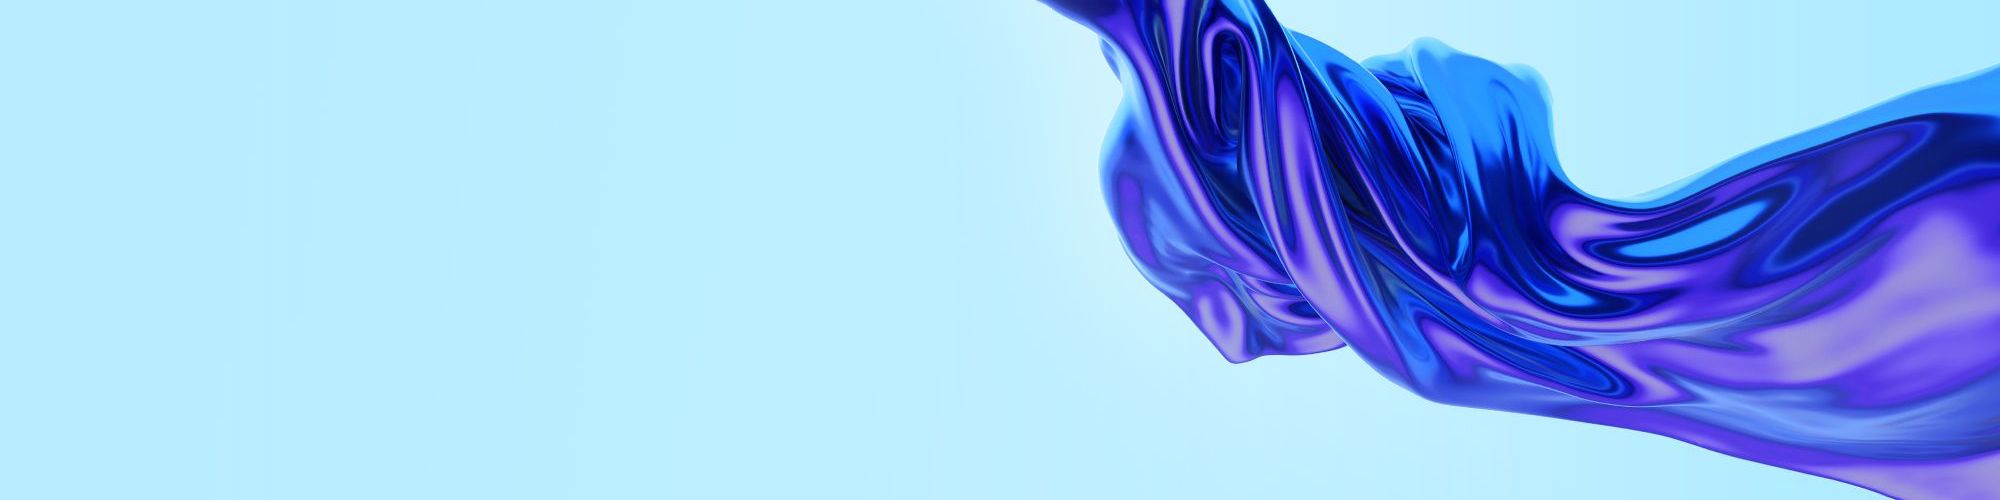 Abstract 3d blue render